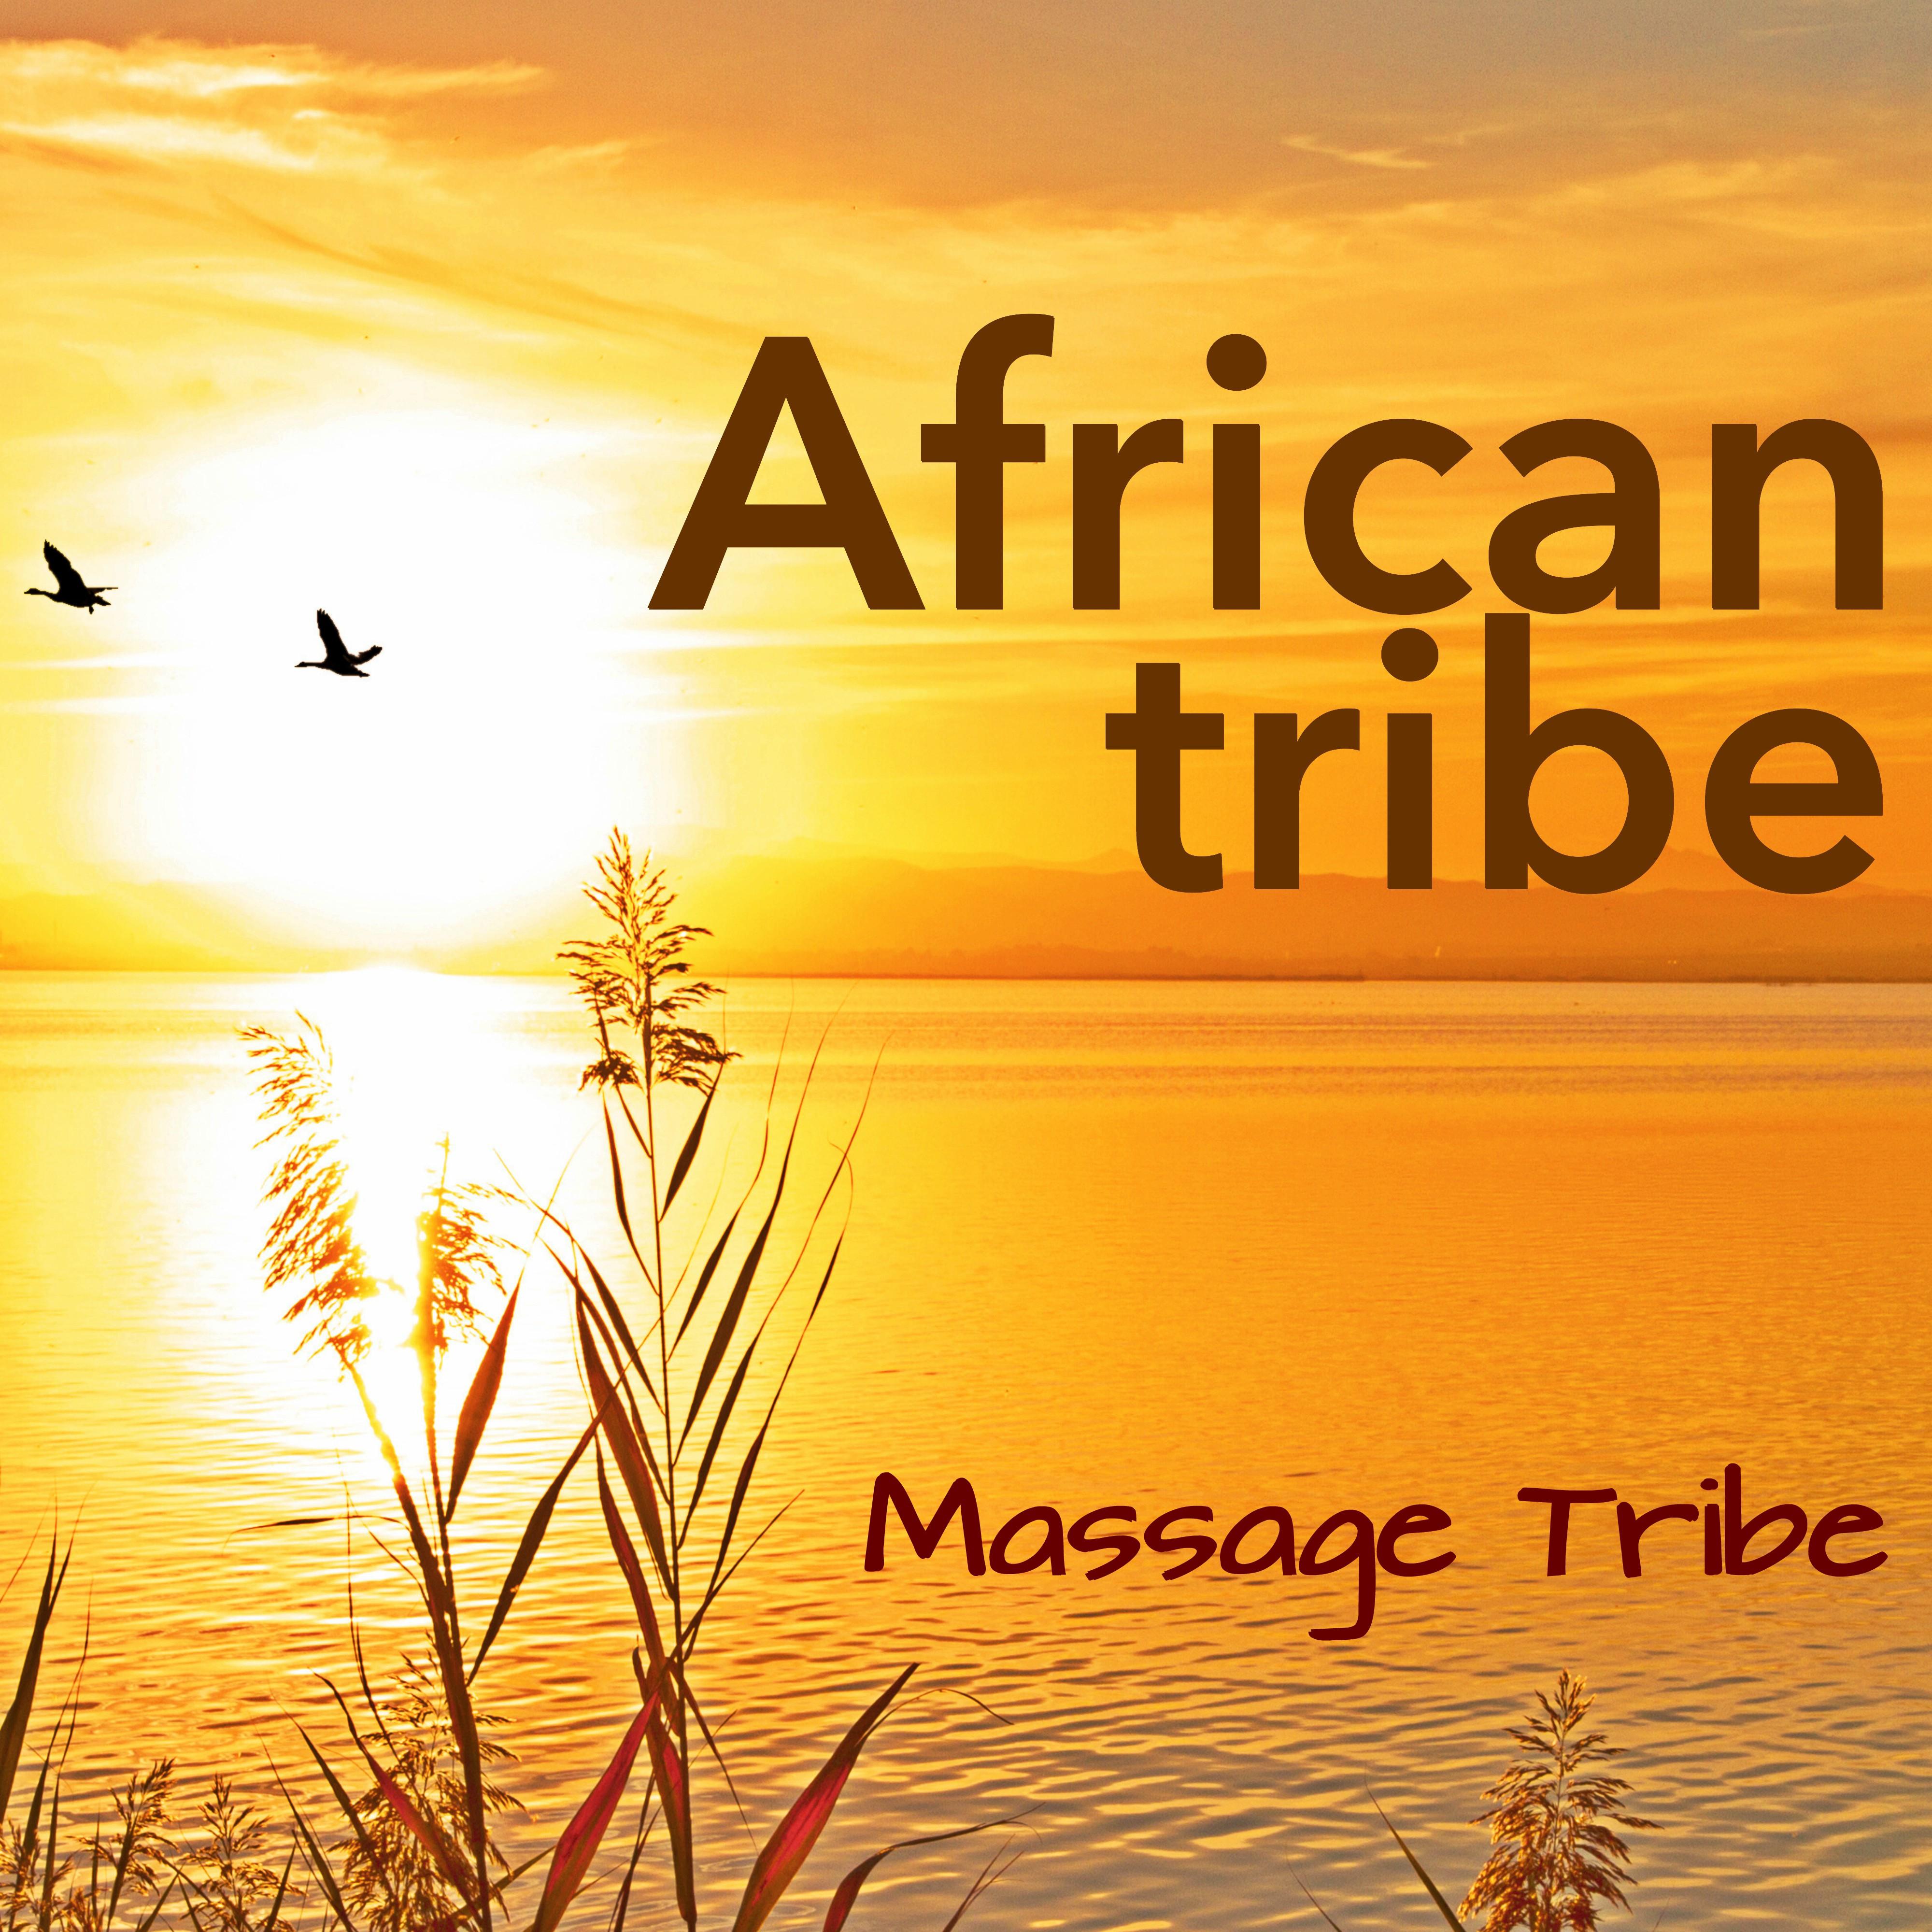 African Tribe - Tribal Music House Version, Dance Party, Drum Sounds